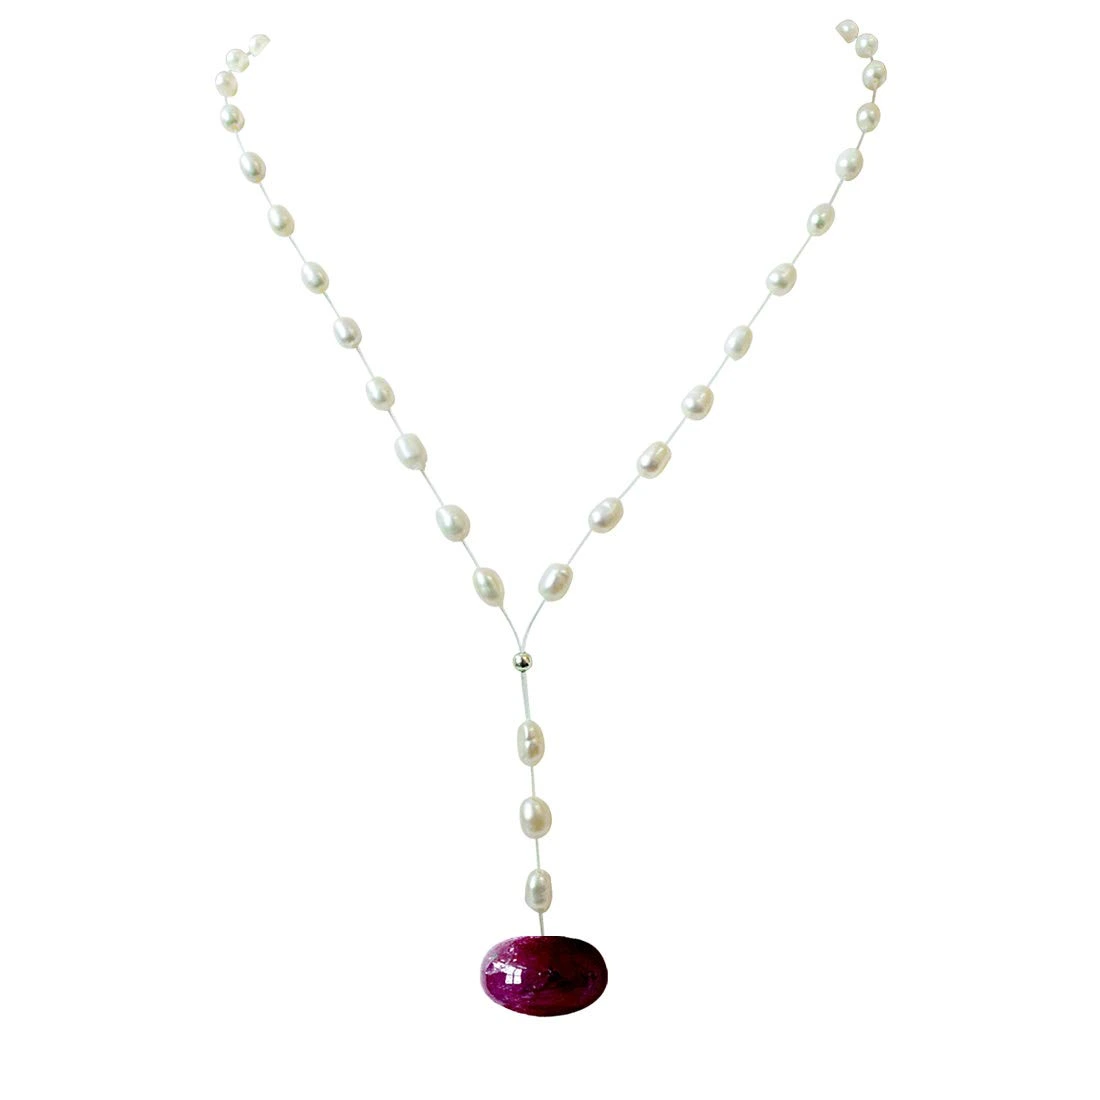 6.82cts Real Natural Round Red Ruby and Freshwater Pearl Wire Style Necklace for Women (SN946)